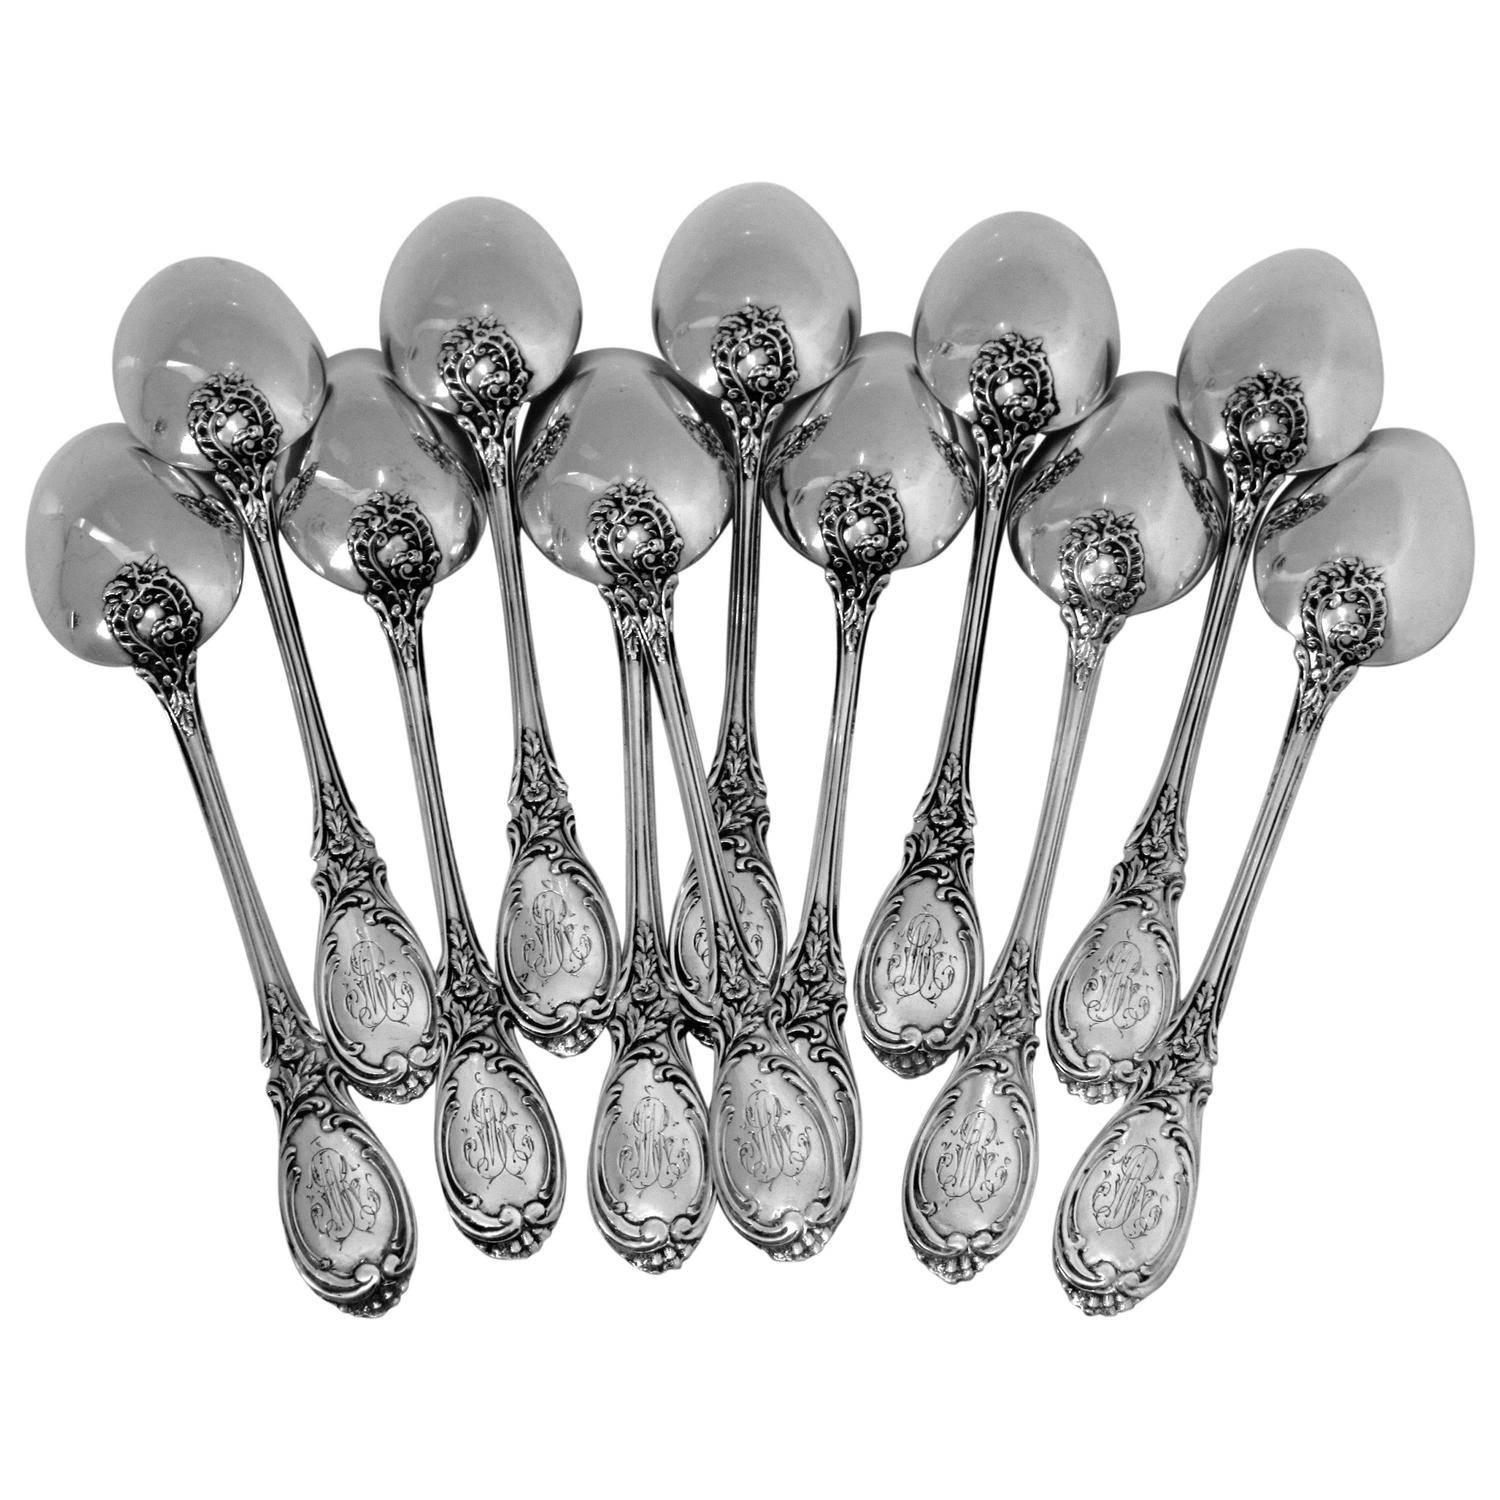 Puiforcat French Sterling Silver Tea/Coffee/Dessert Spoons Set 12 pc Roses Box